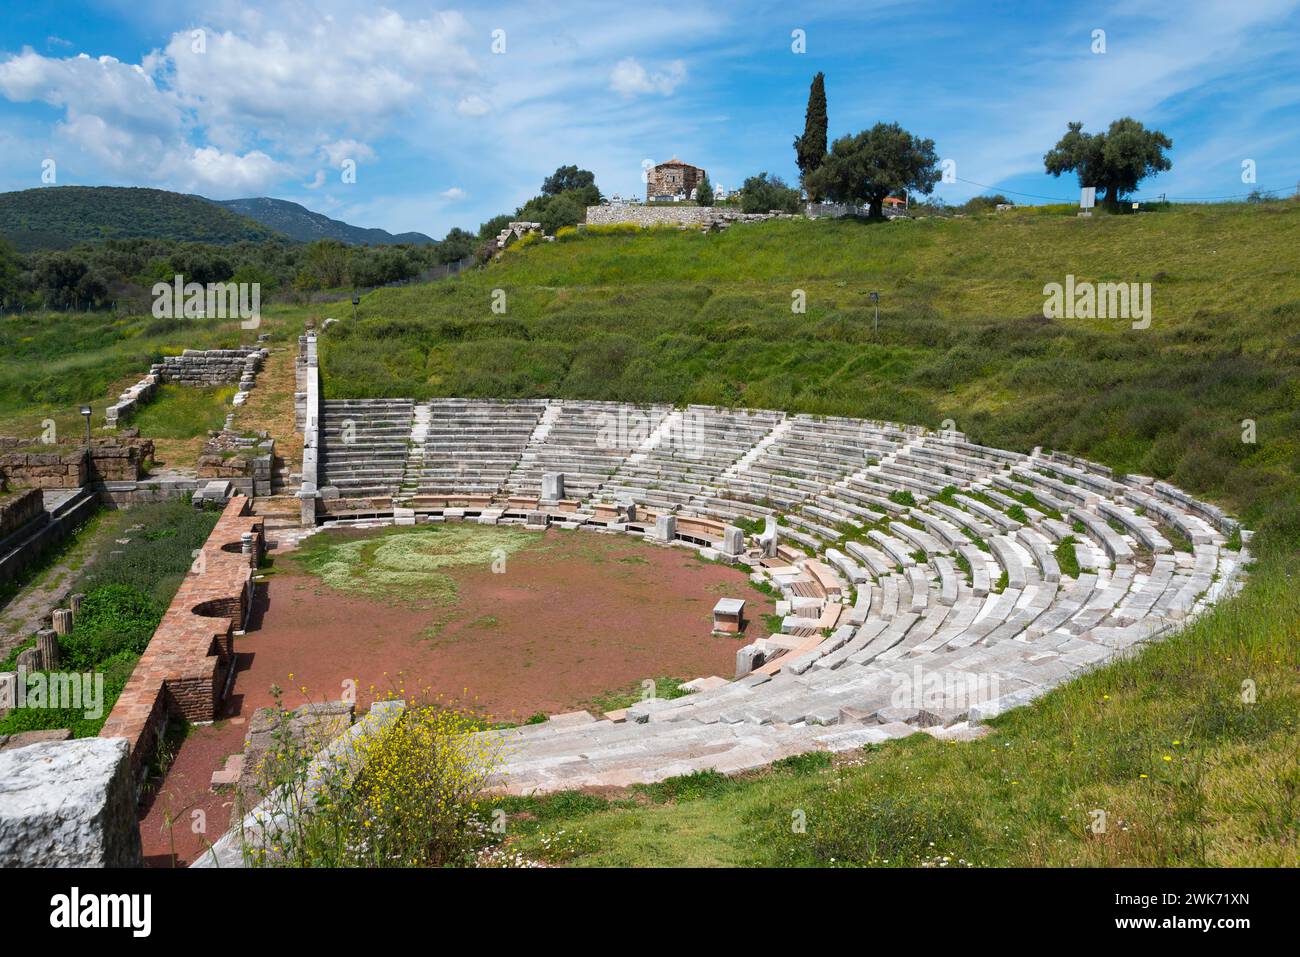 An ancient theatre with stone steps surrounded by lush greenery and ruins in the background, Messene, ancient Greek polis, Messini, Messenia Stock Photo